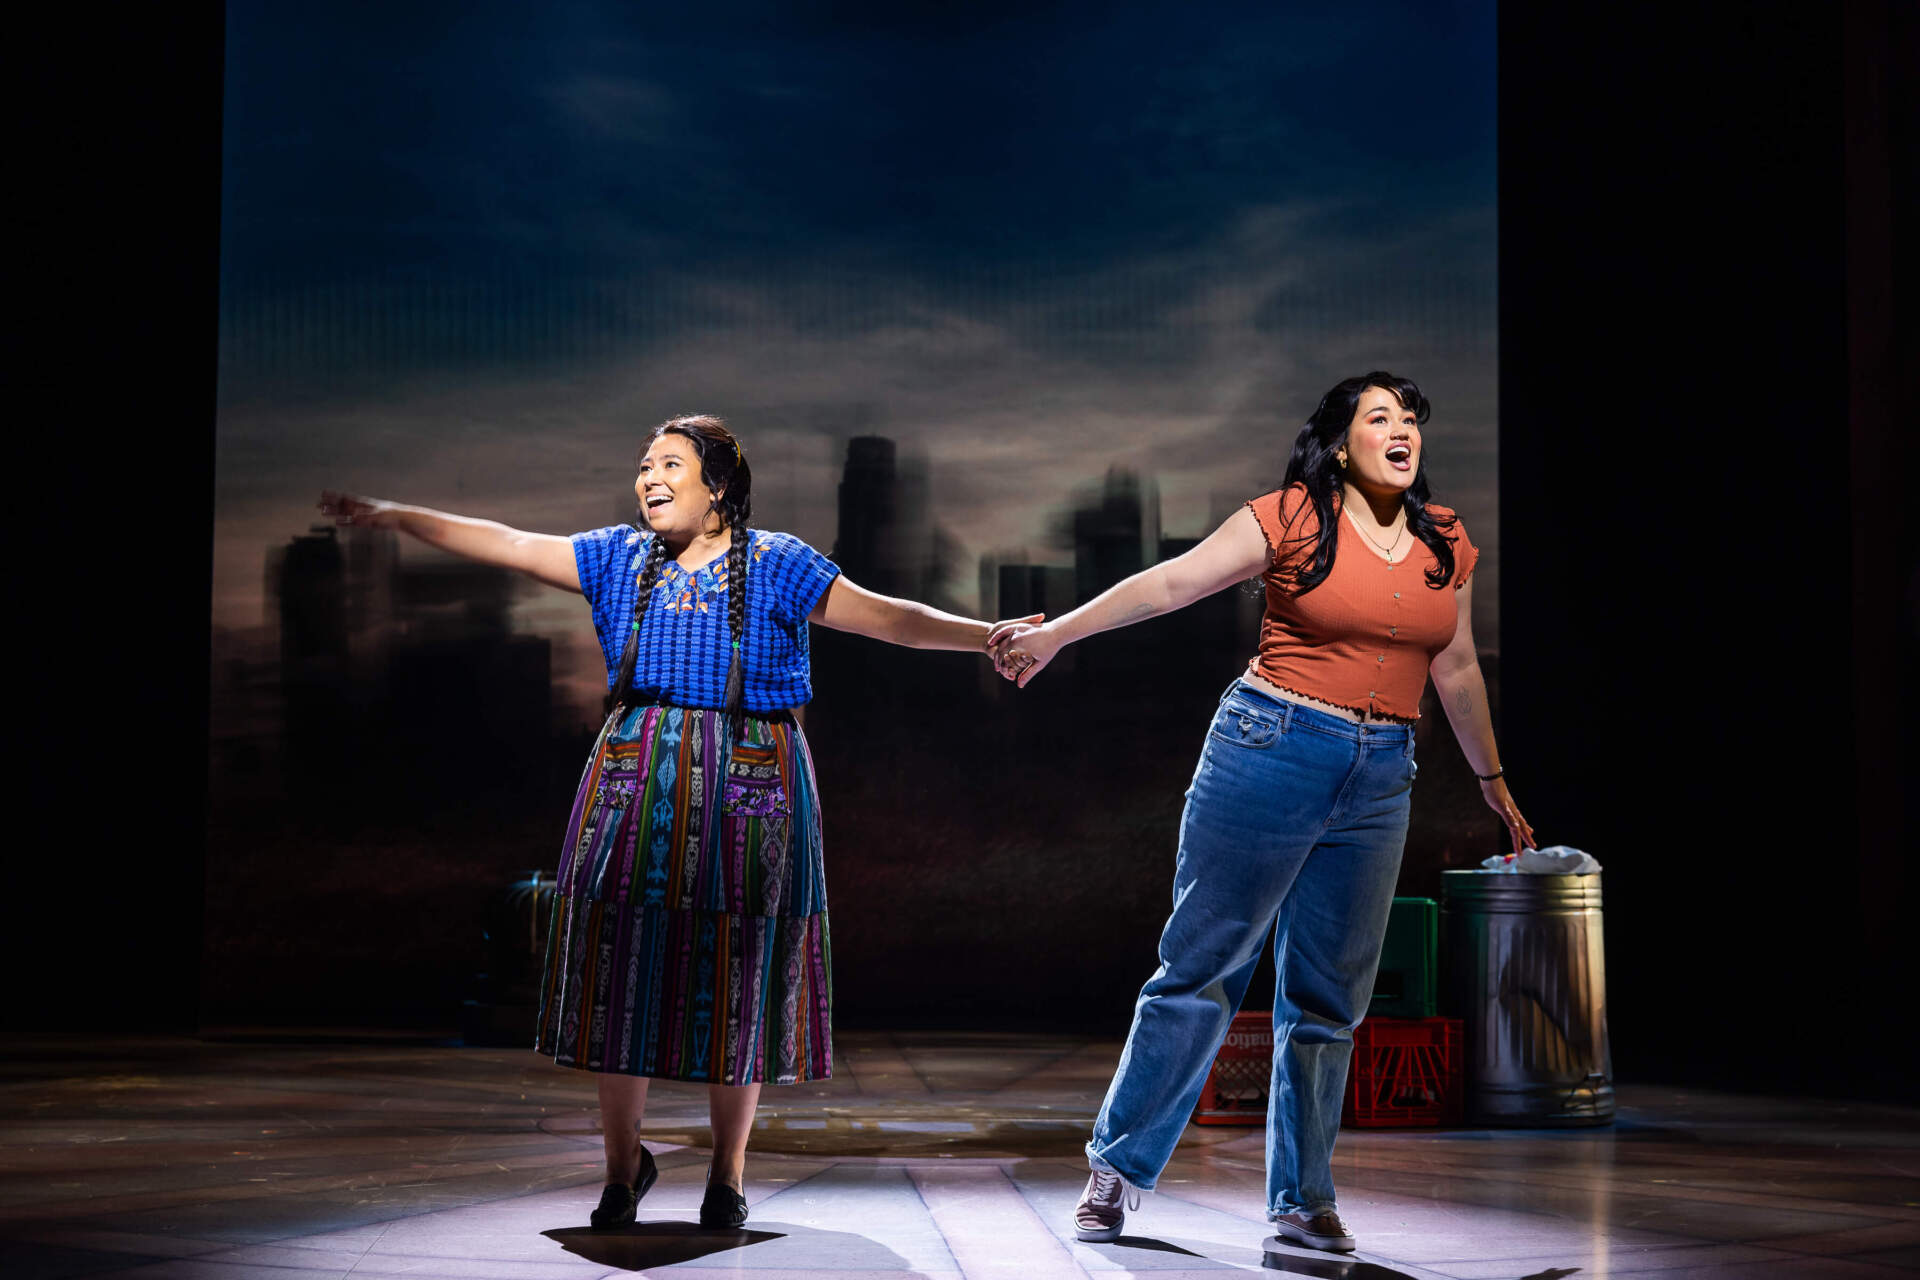 Satya Chávez as Izel and Lucy Godínez as Ana in "Real Women Have Curves: The Musical" at the American Repertory Theater. (Couresy Nile Hawver/Maggie Hall)